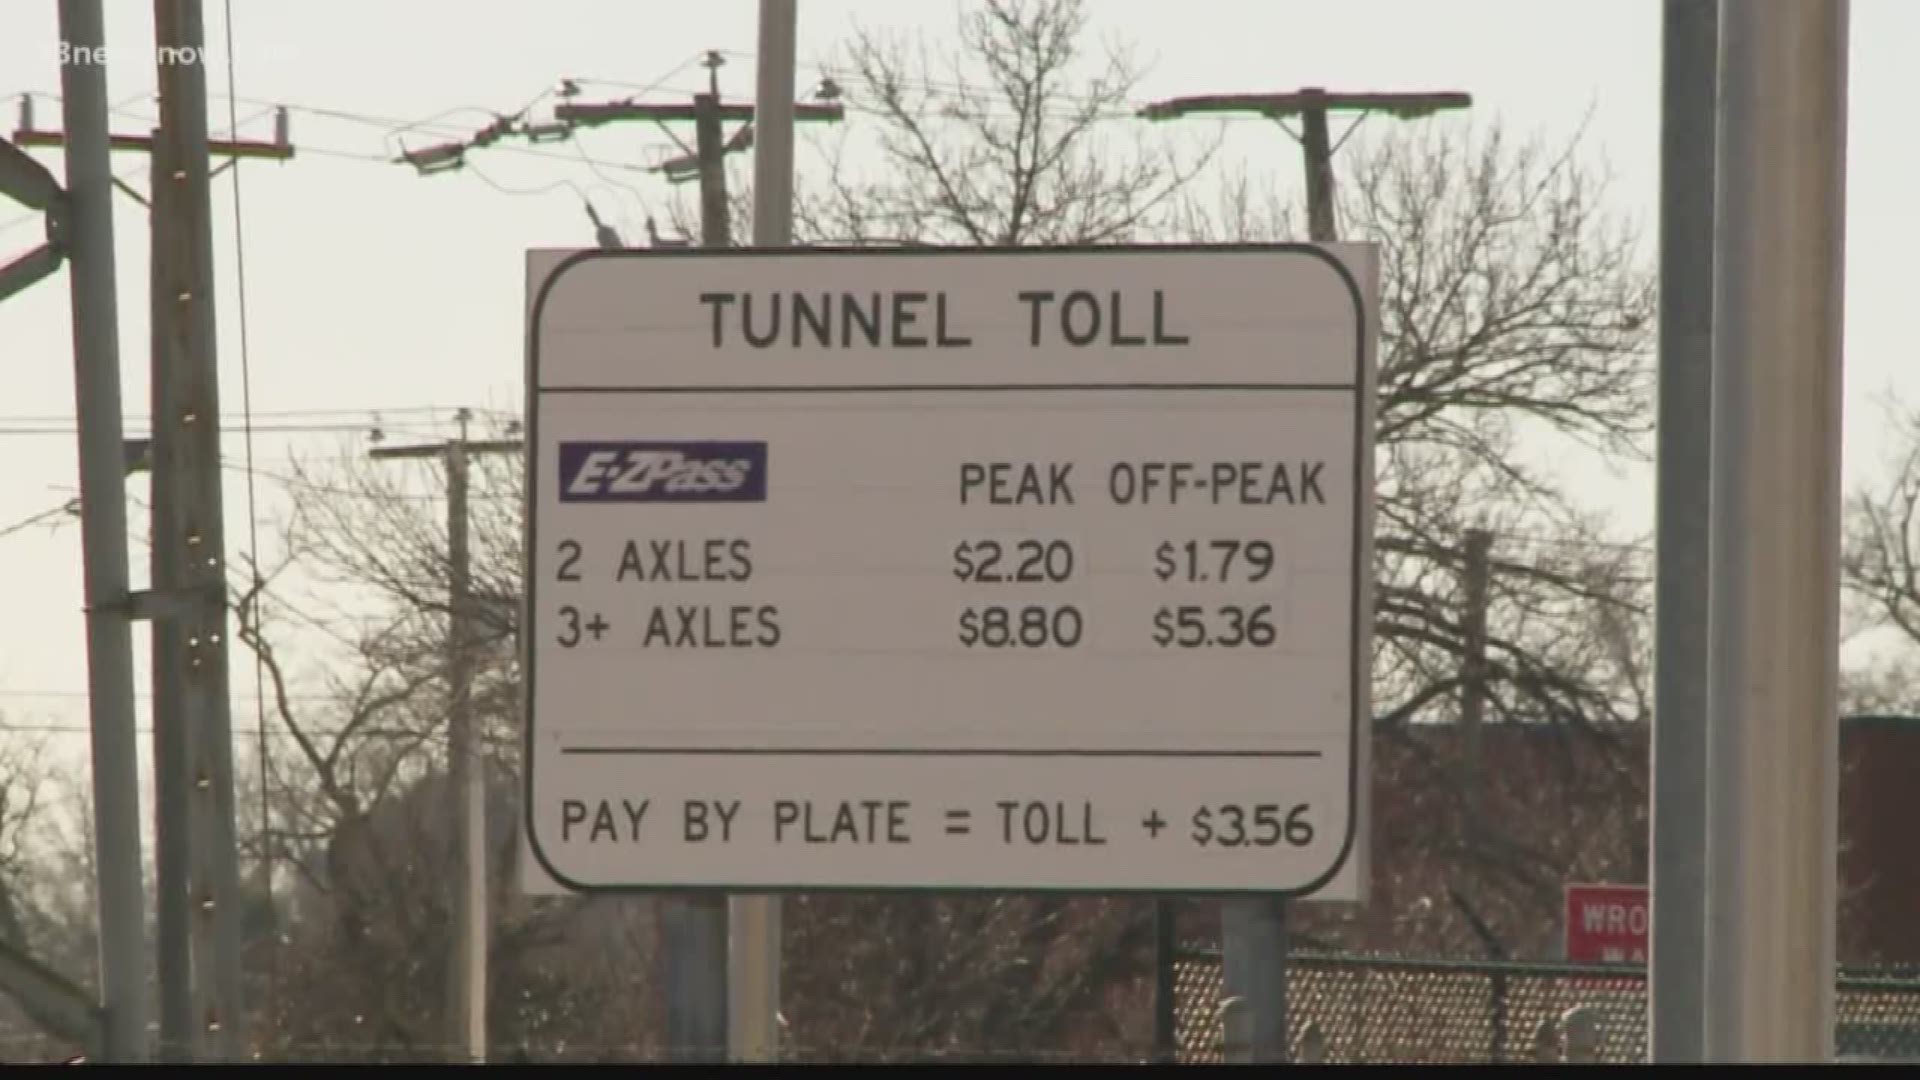 The Hampton Roads Transportation Planning Organization wants to disciss the agreement between the state and Elizabeth River Crossing as tolls continue to rise.